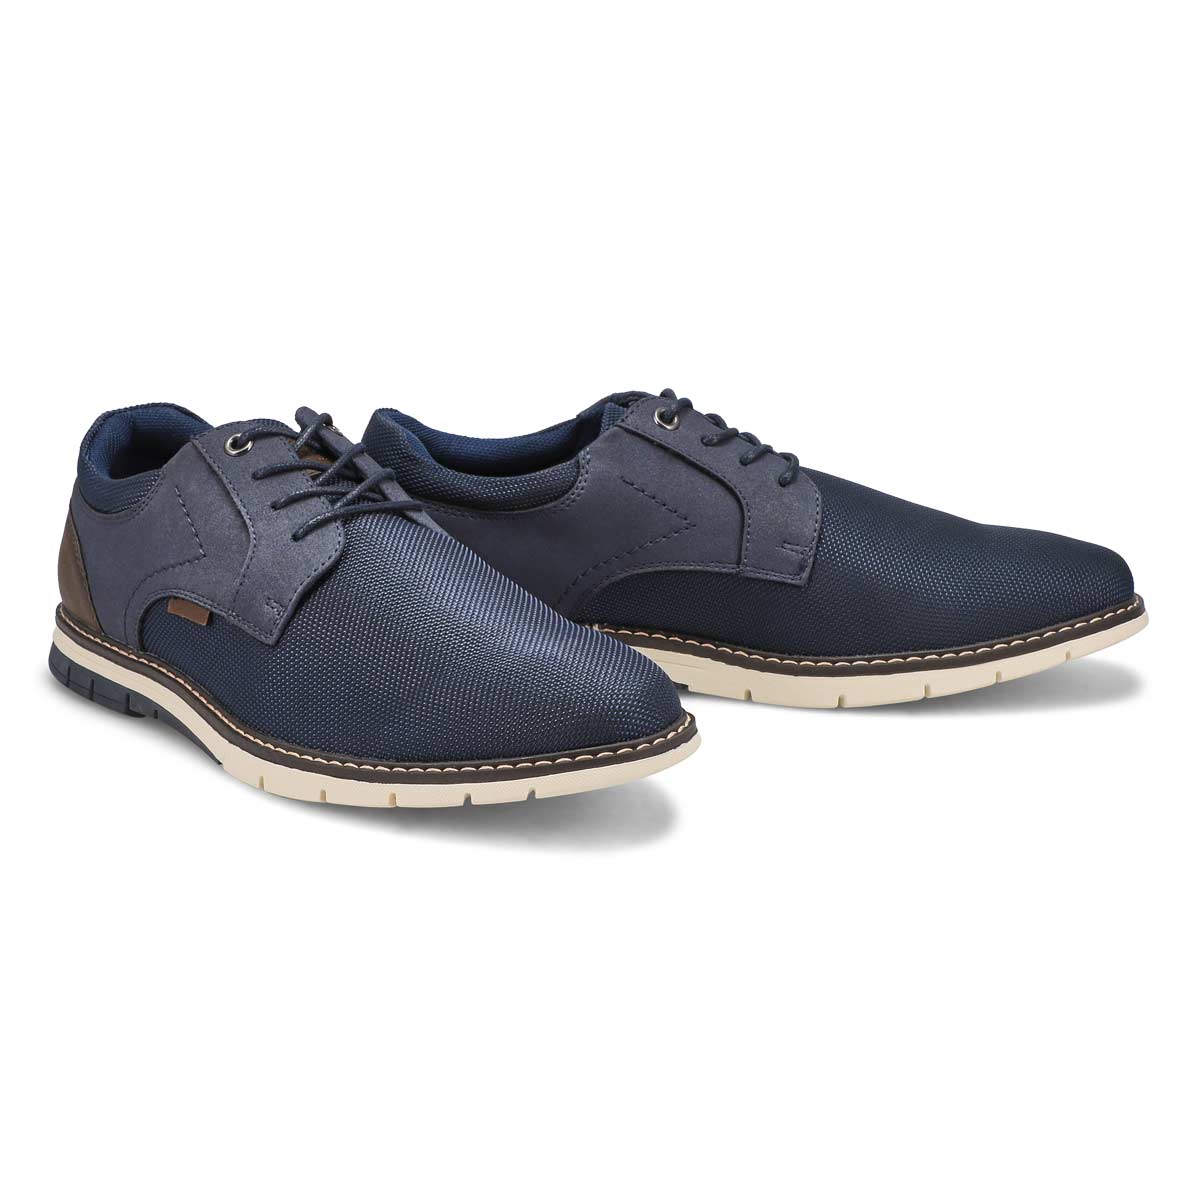 Men's Royce Lace Up Casual Oxford - Navy